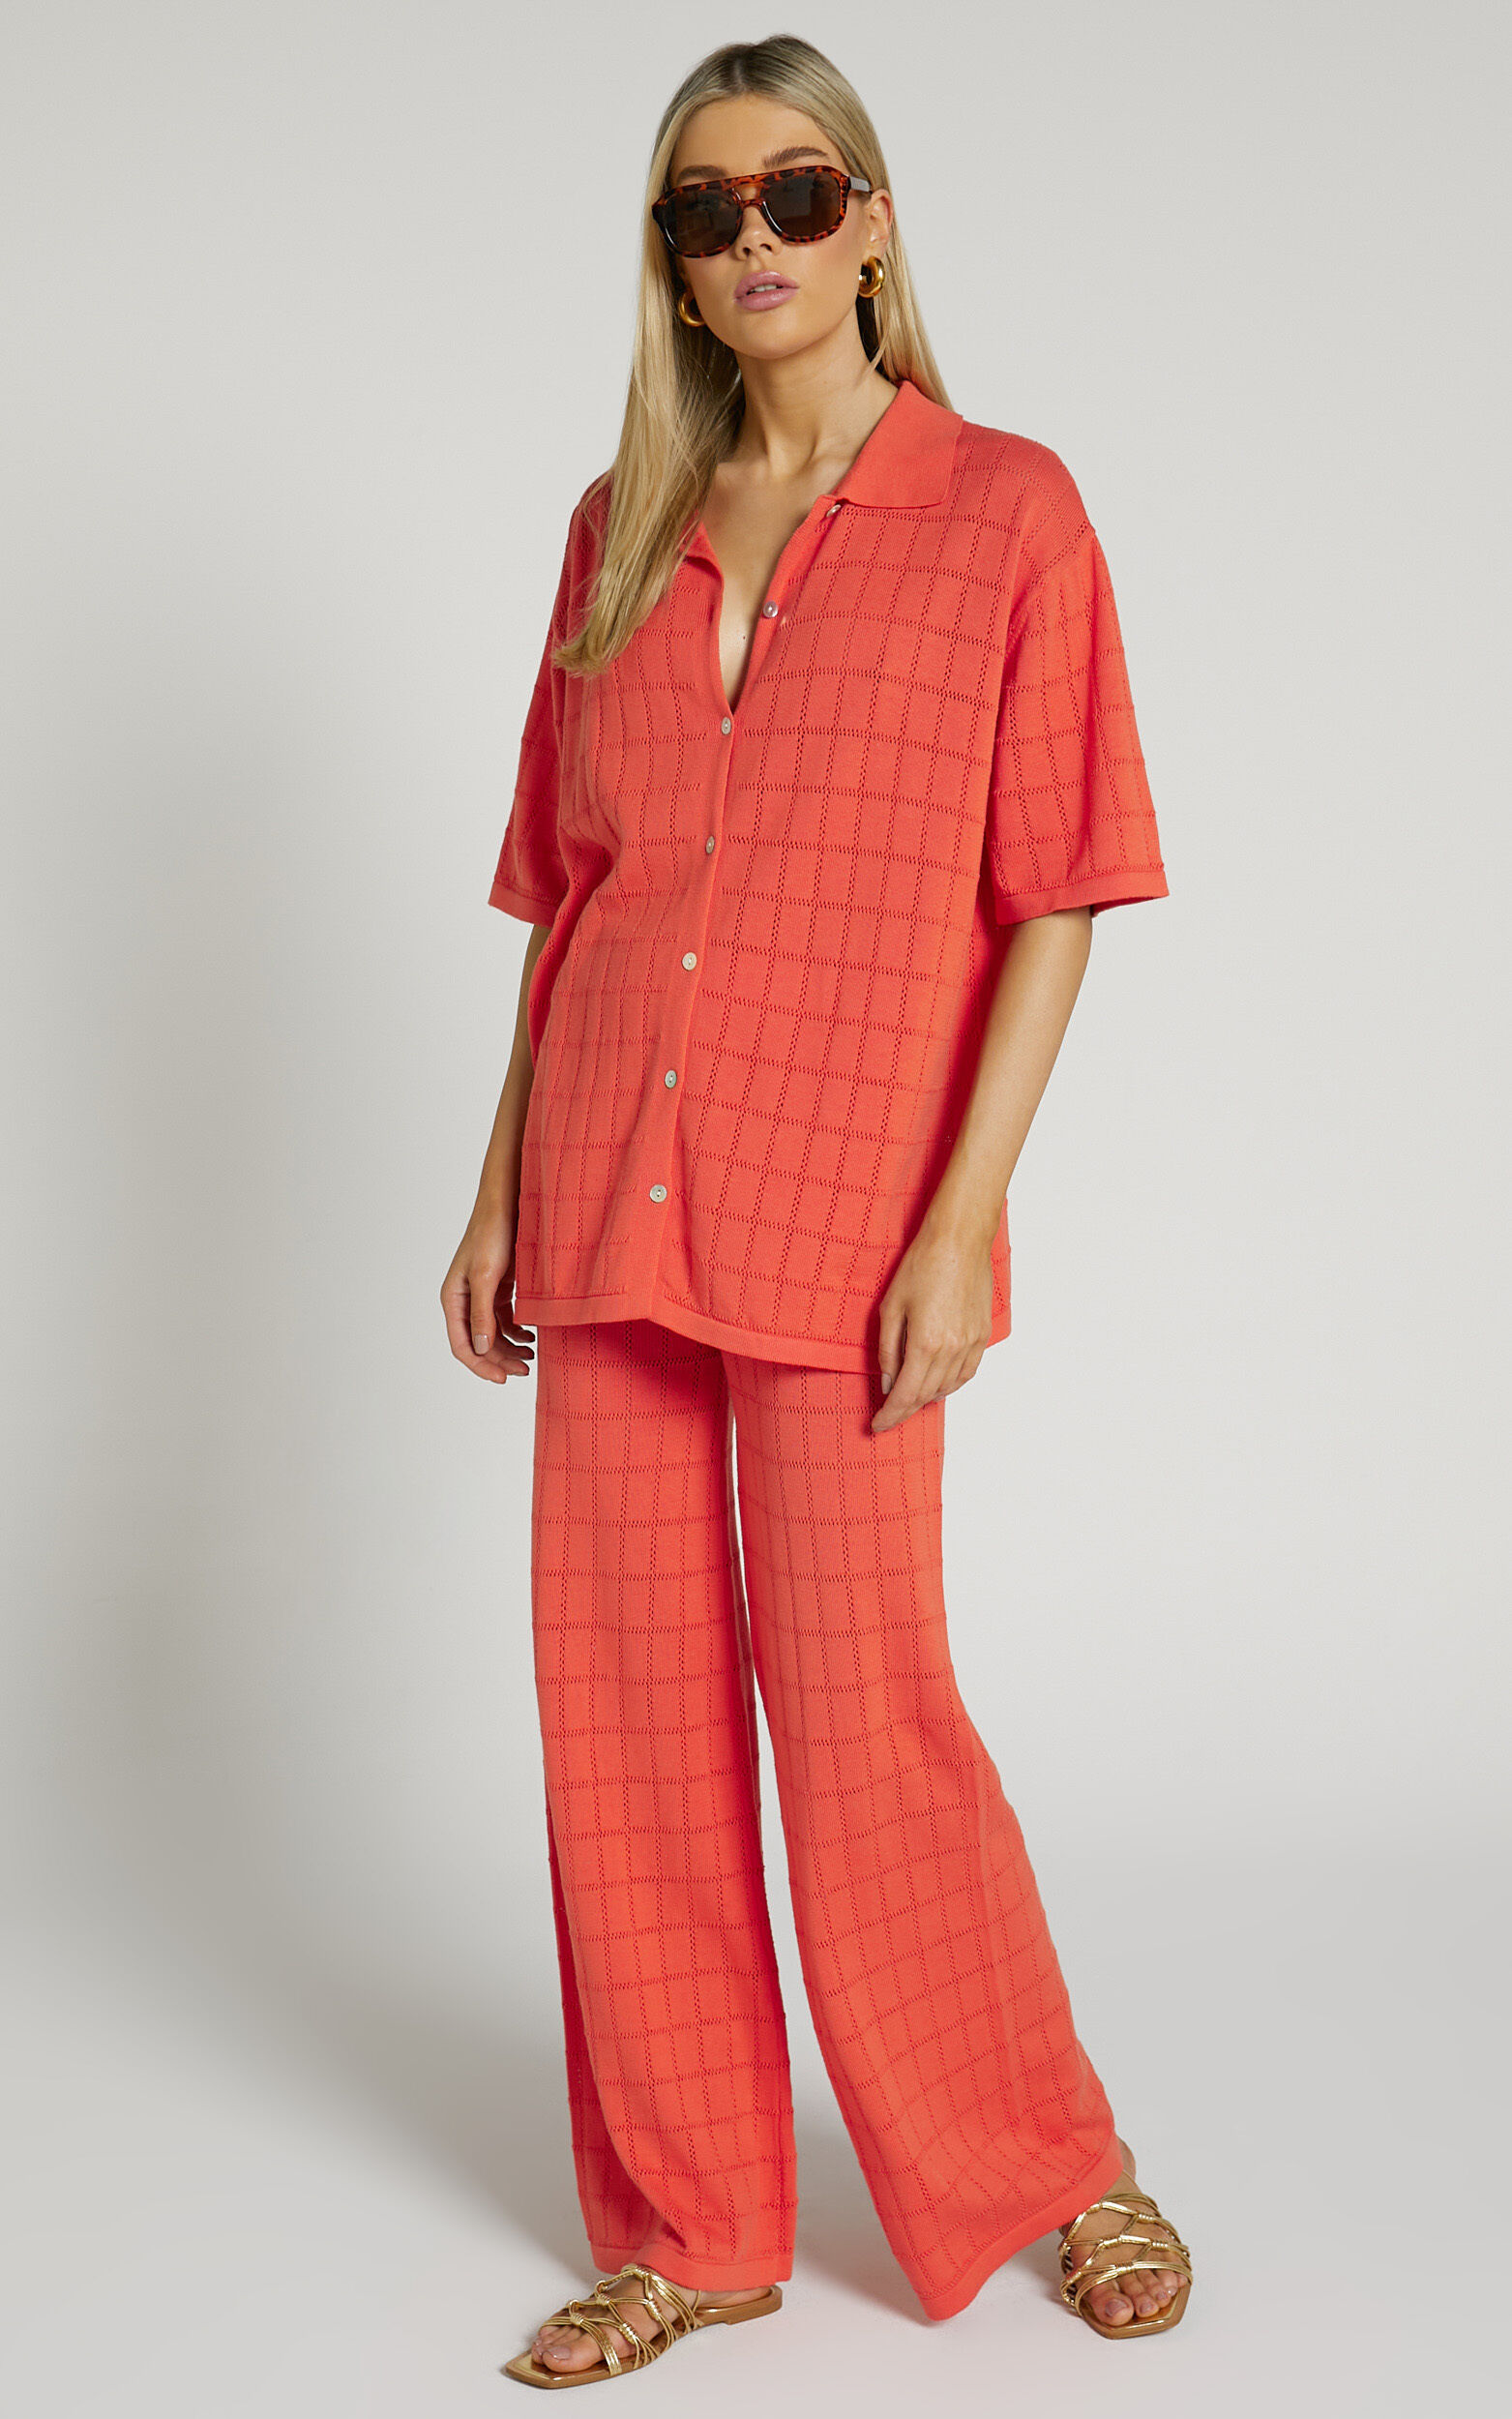 Tommy Two Piece Set - Knit Button Through Top and Pants Two Piece Set in Coral - 04, PNK4